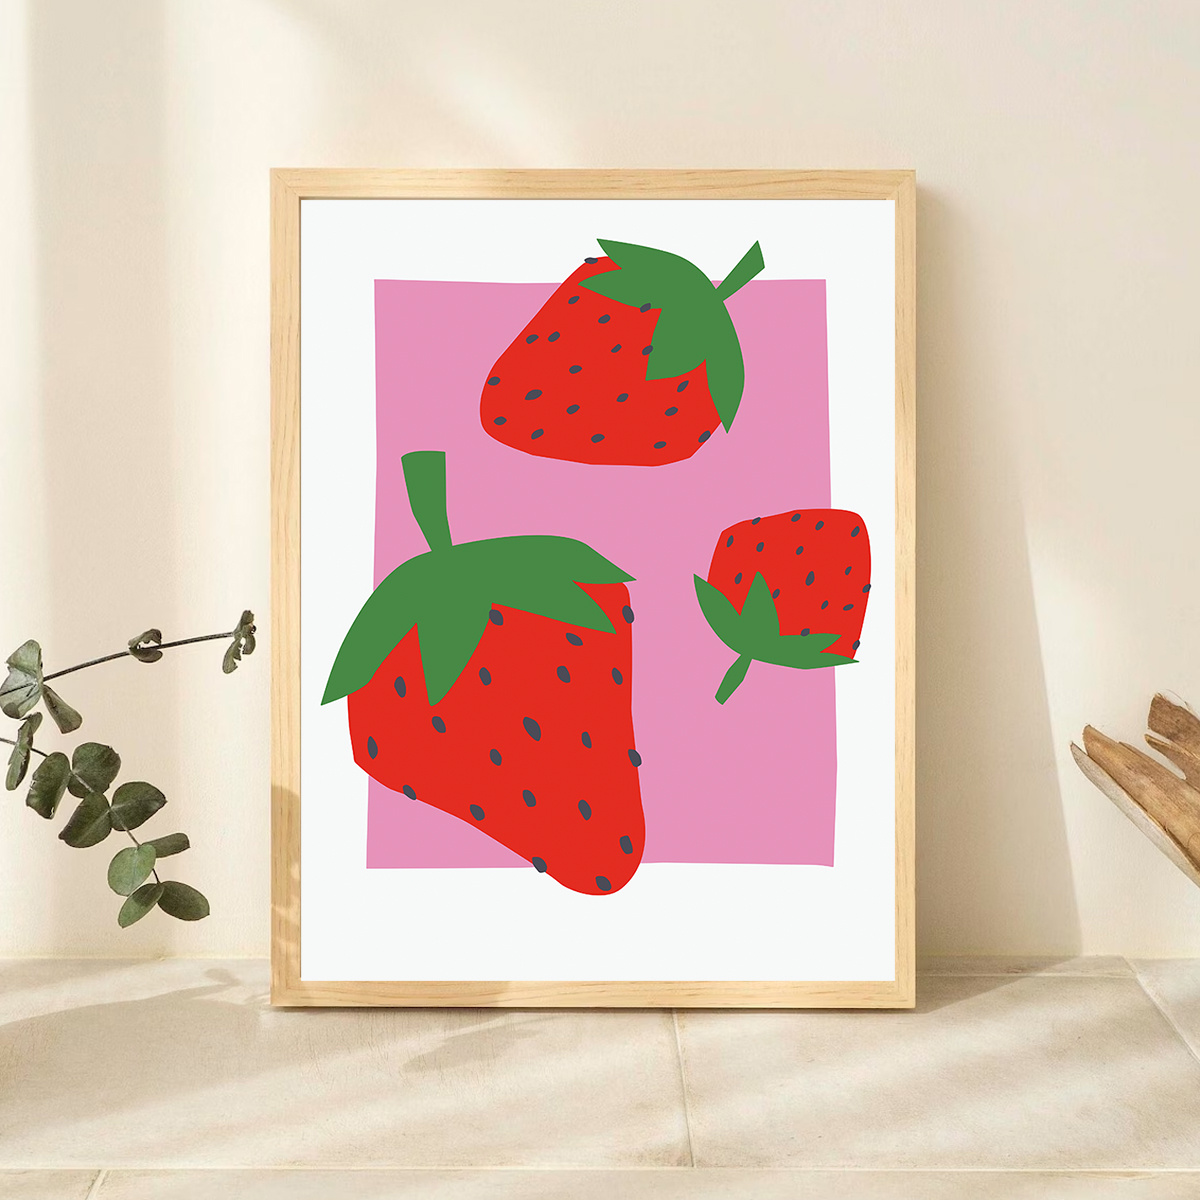  Strawberry Fruit Market Print Abstract Fruit Wall Art  Strawberry Fruit Print Still Life Fruit Painting Modern Kitchen Pictures  Wall Decor Strawberry Fields Poster for Living Room 16x24inch No Frame:  Posters 